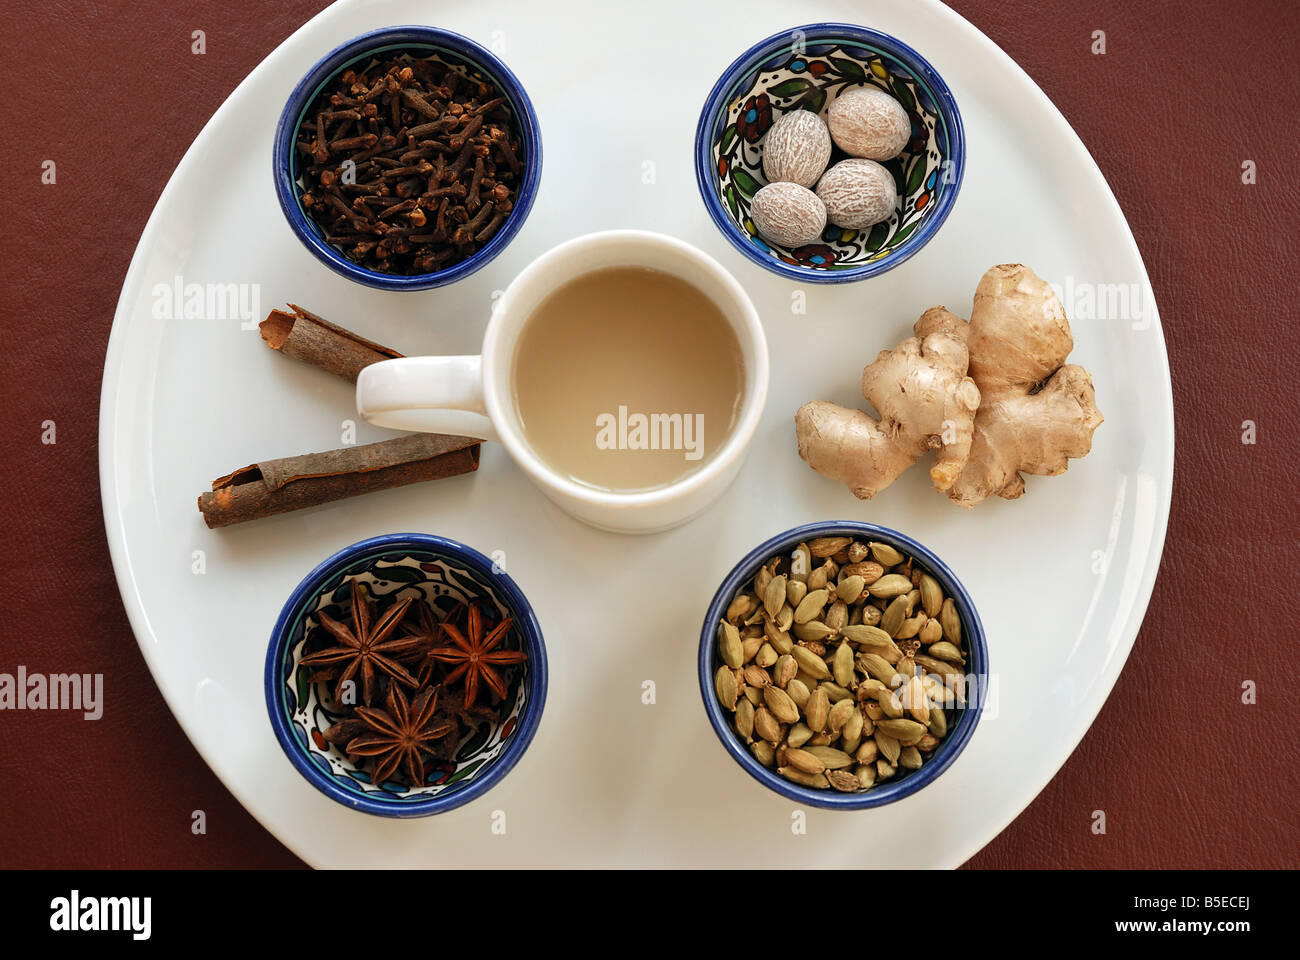 Masala chai  (spiced tea), the Indian tea made with a mixture of aromatic Indian spices and herbs. Stock Photo